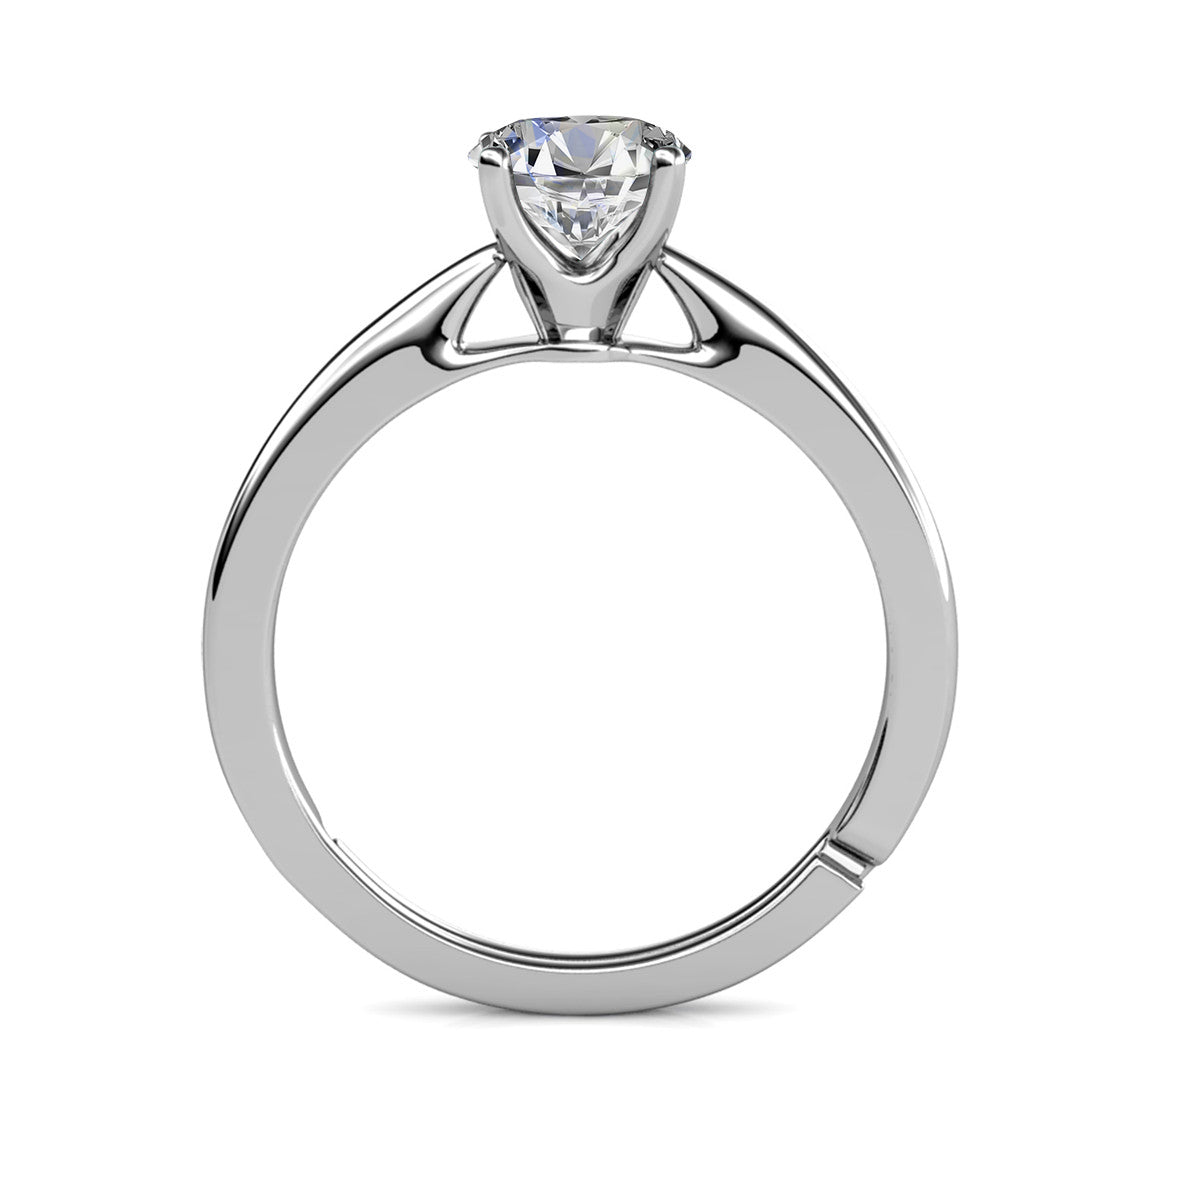 Moissanite by Cate & Chloe Abigail Sterling Silver Ring with Moissanite Crystals